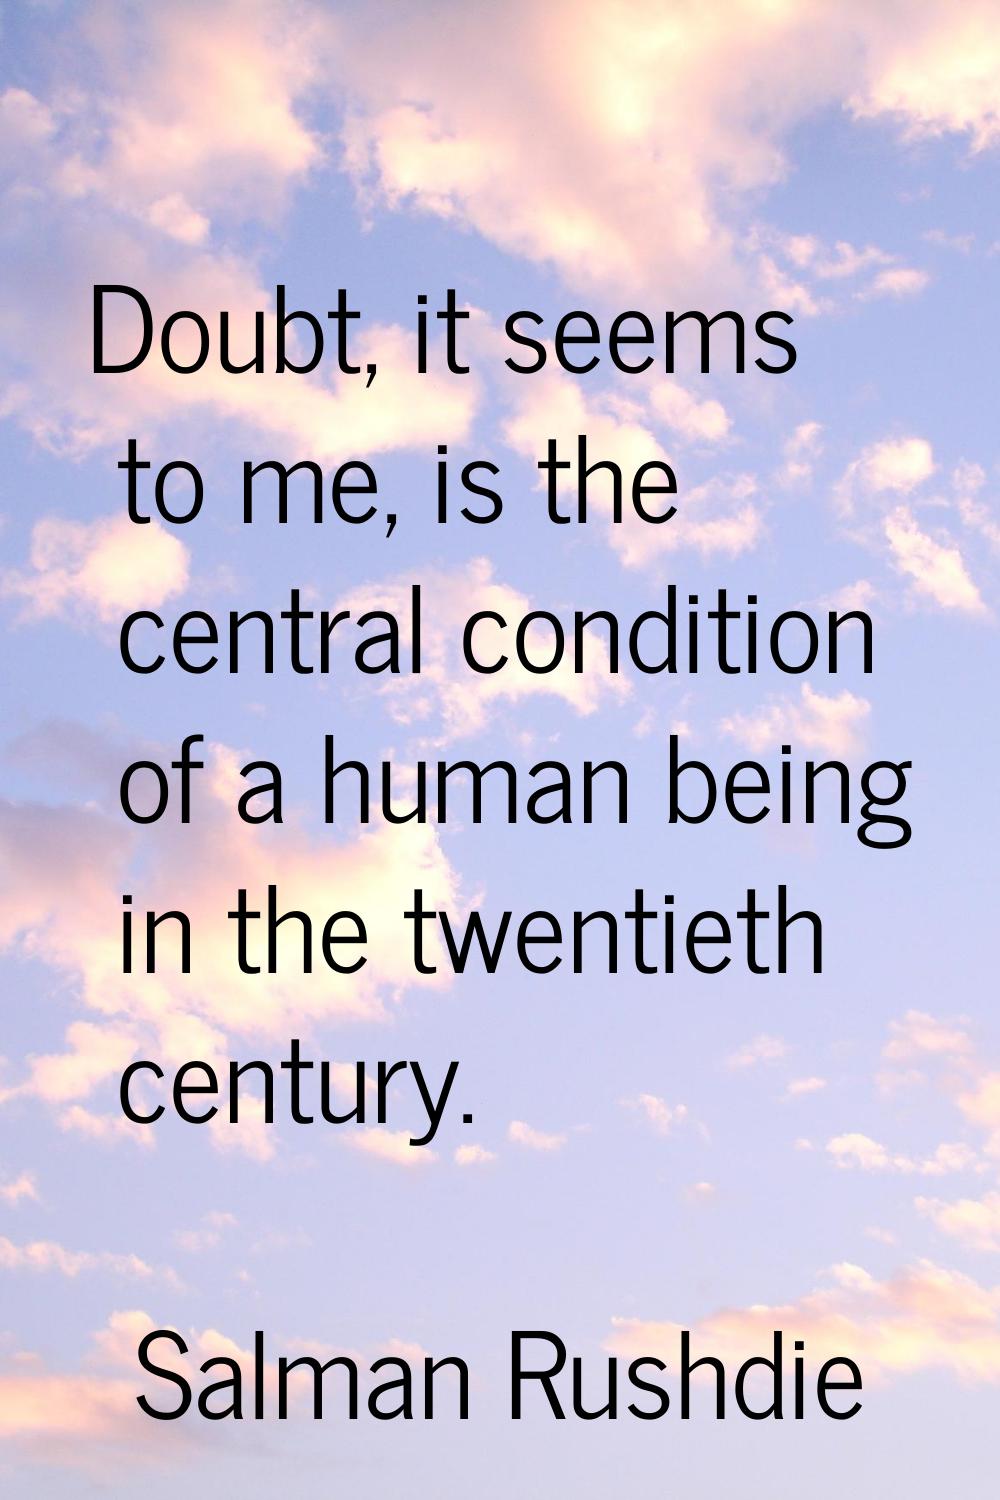 Doubt, it seems to me, is the central condition of a human being in the twentieth century.